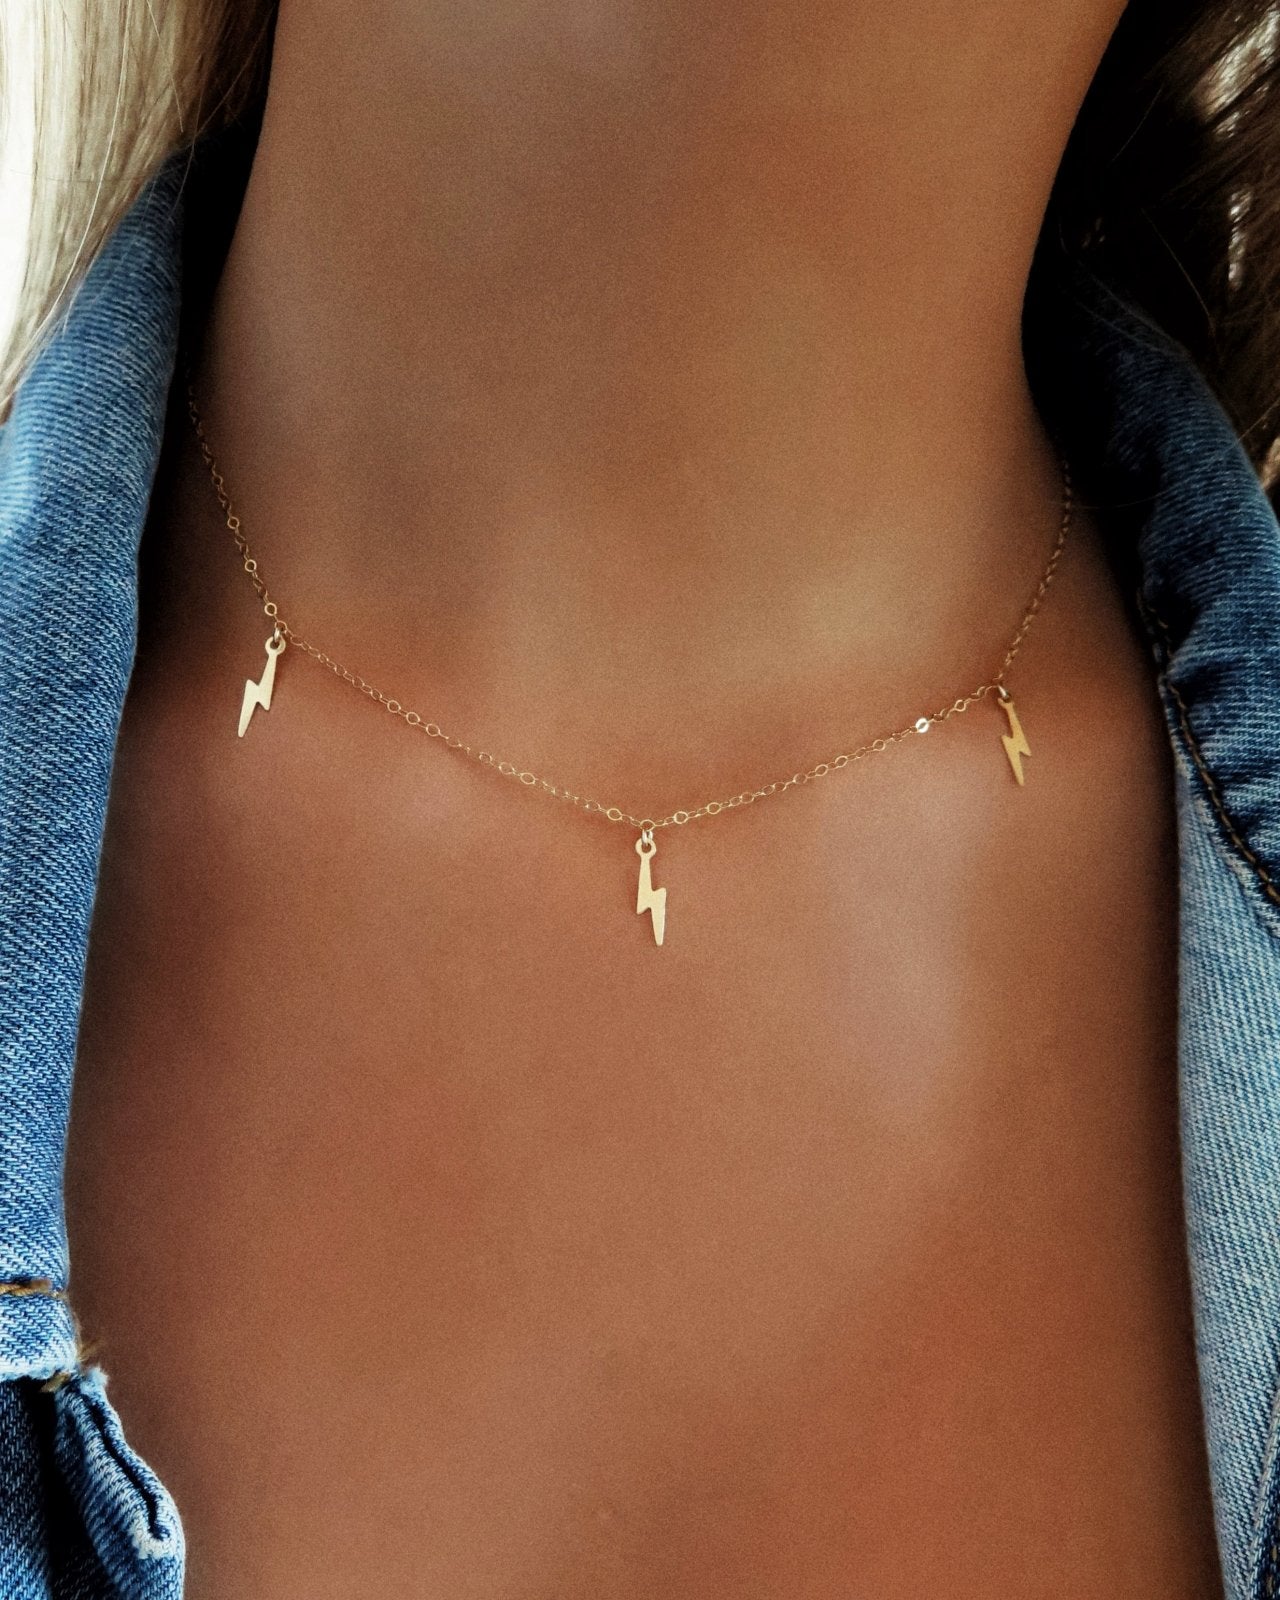 TRIPLE LIGHTNING BOLT NECKLACE - The Littl - 14k Yellow Gold Fill - Deluxe Chain